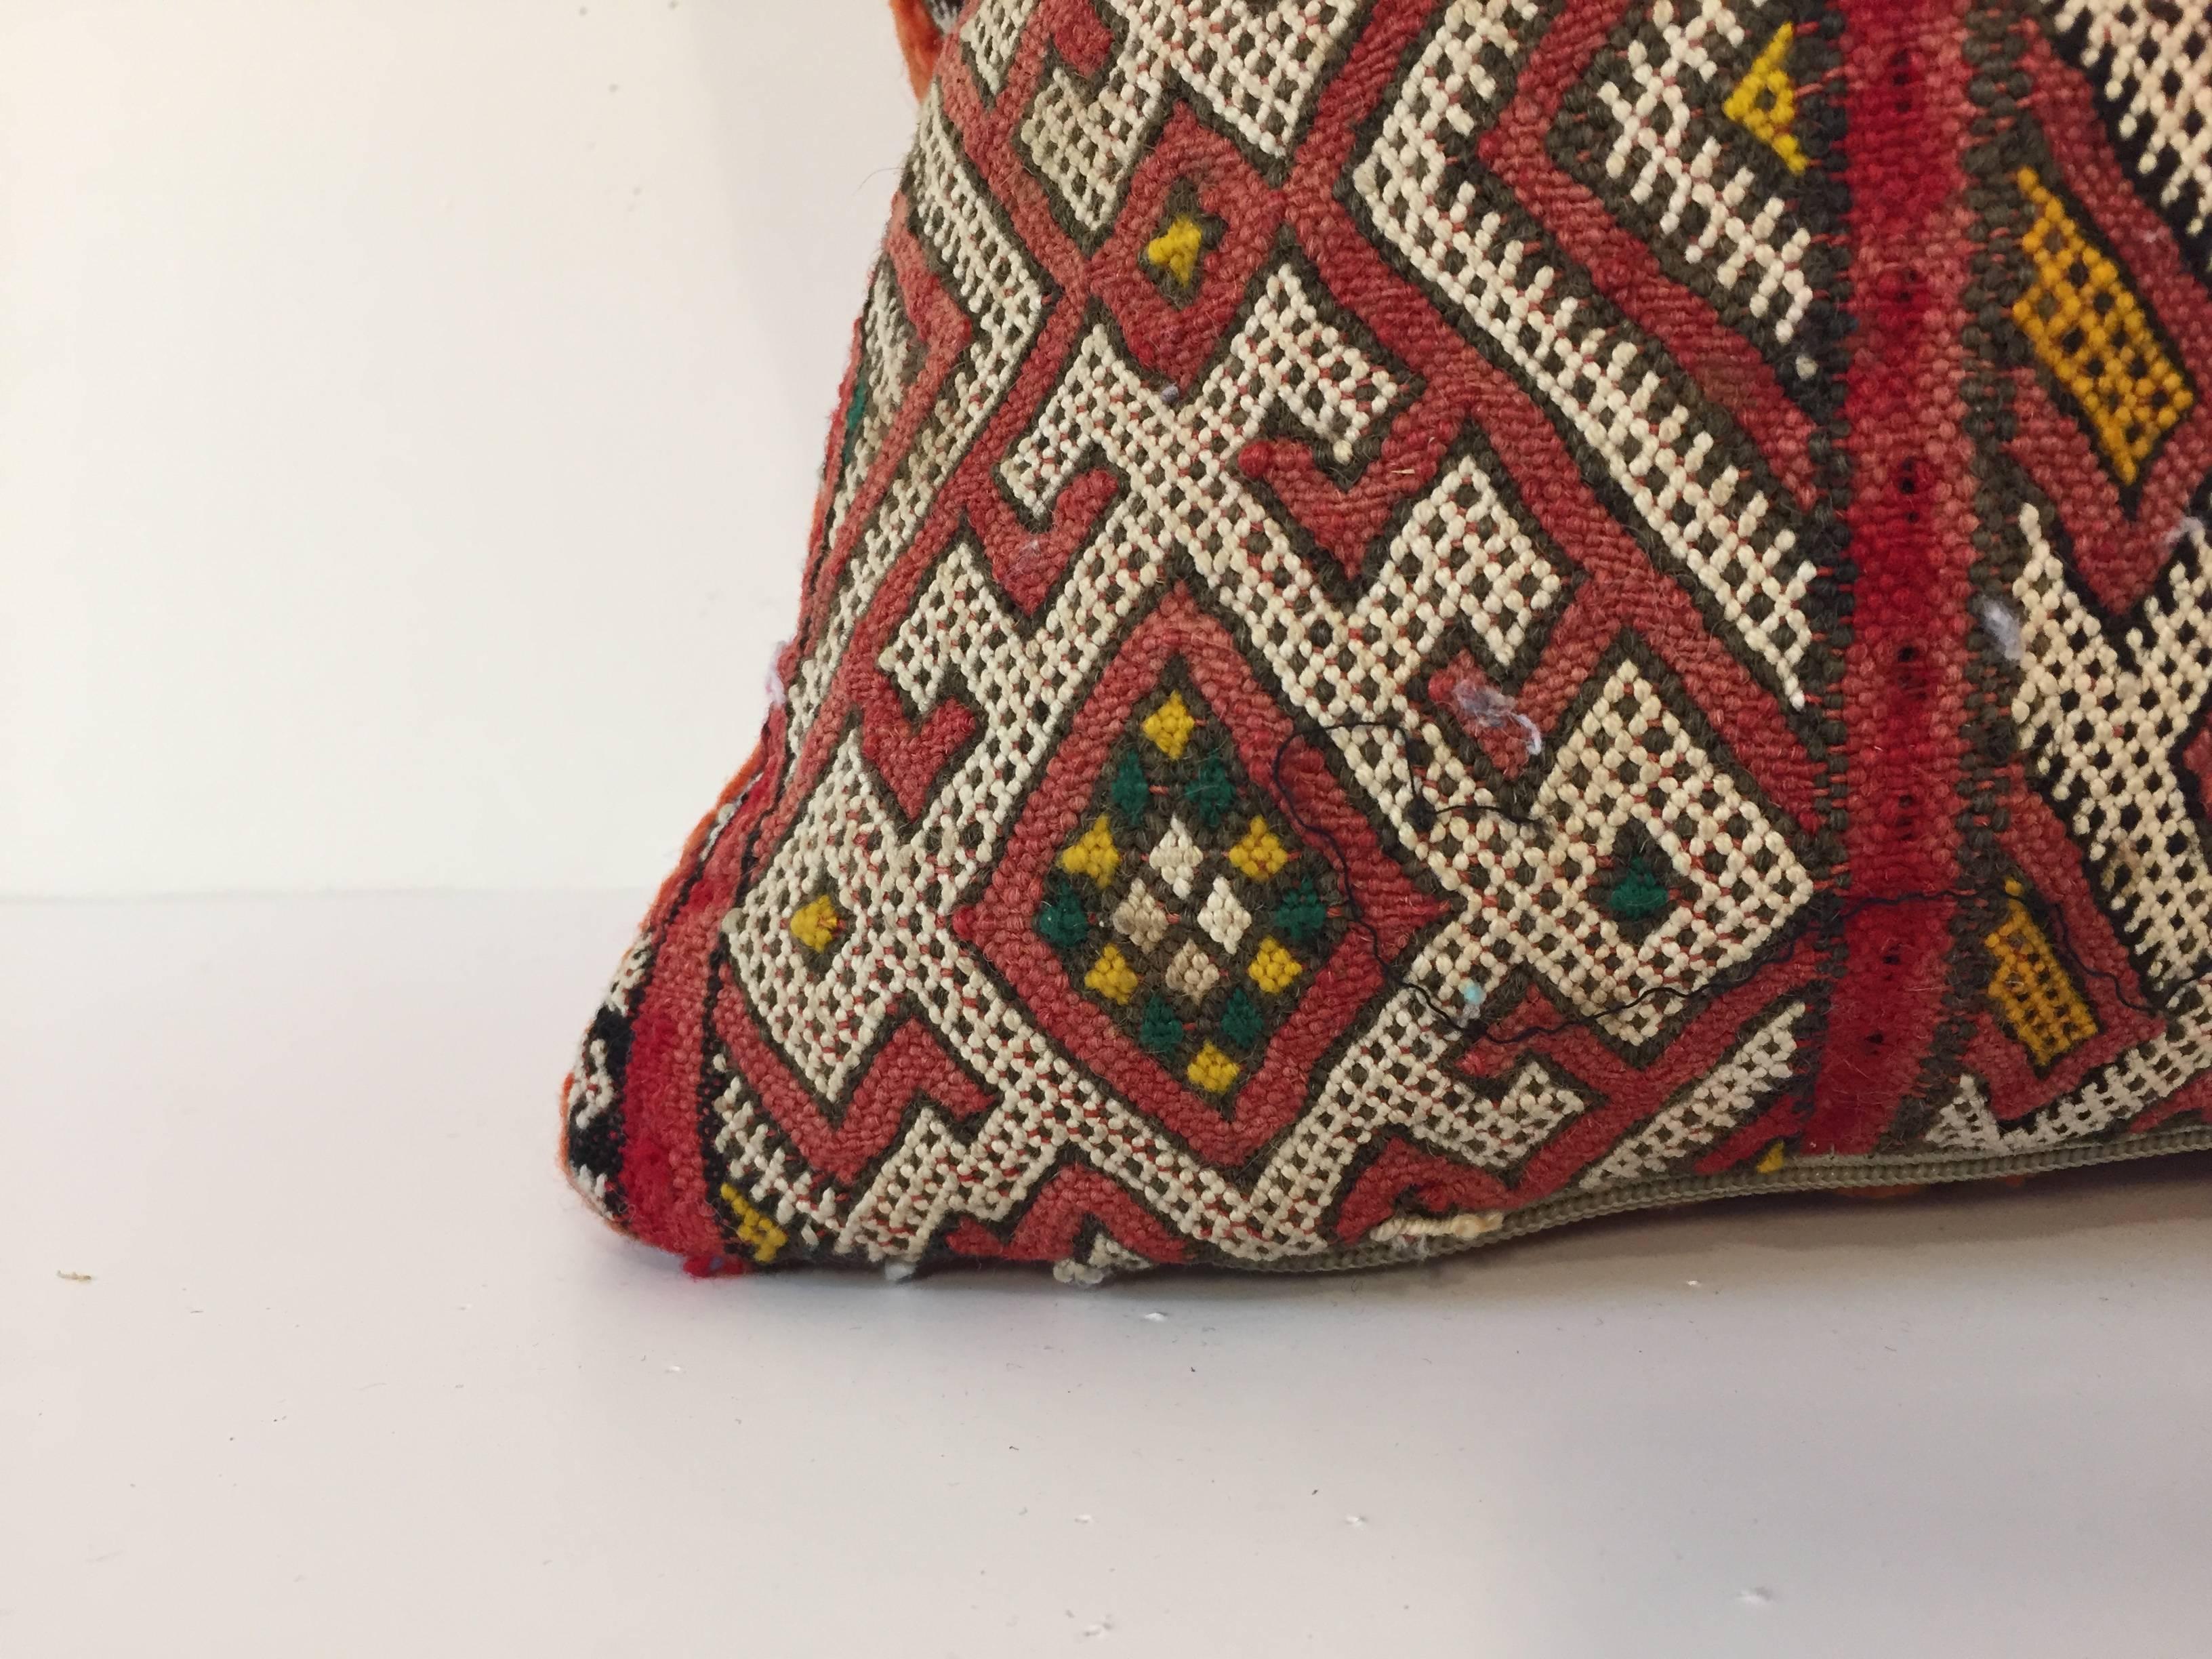 Moroccan Berber pillow red with geometric tribal designs.
Handwoven tribal throw pillow made from a vintage flat-weave rug. 
The front and the back are made from a different rug, front is more elaborate and back is burnt orange. 
Handwoven by